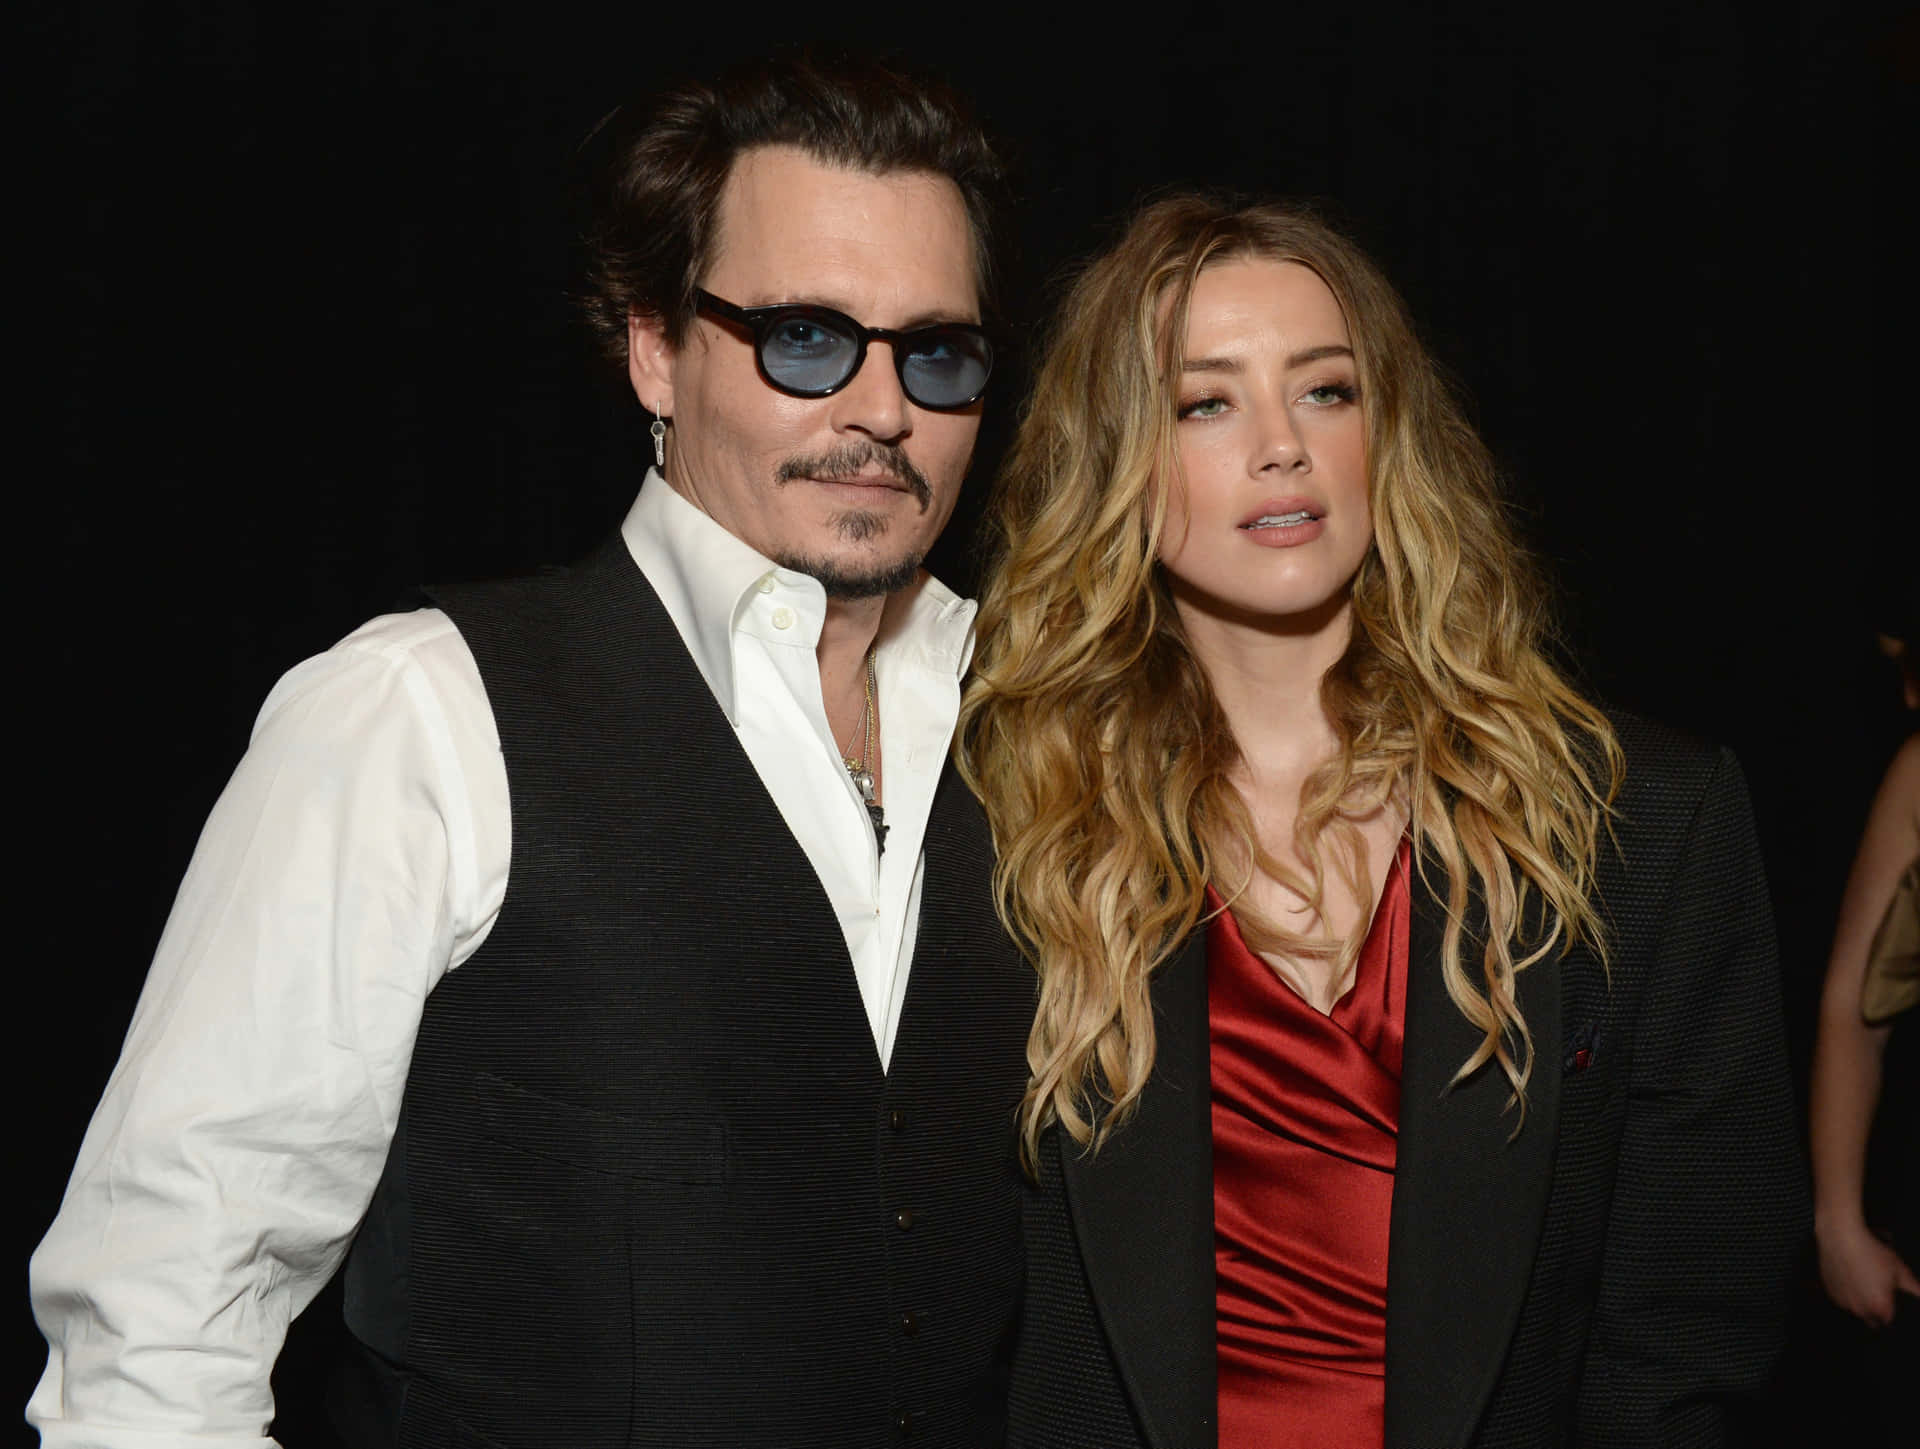 Johnny Depp and Amber Heard, a power couple in Hollywood